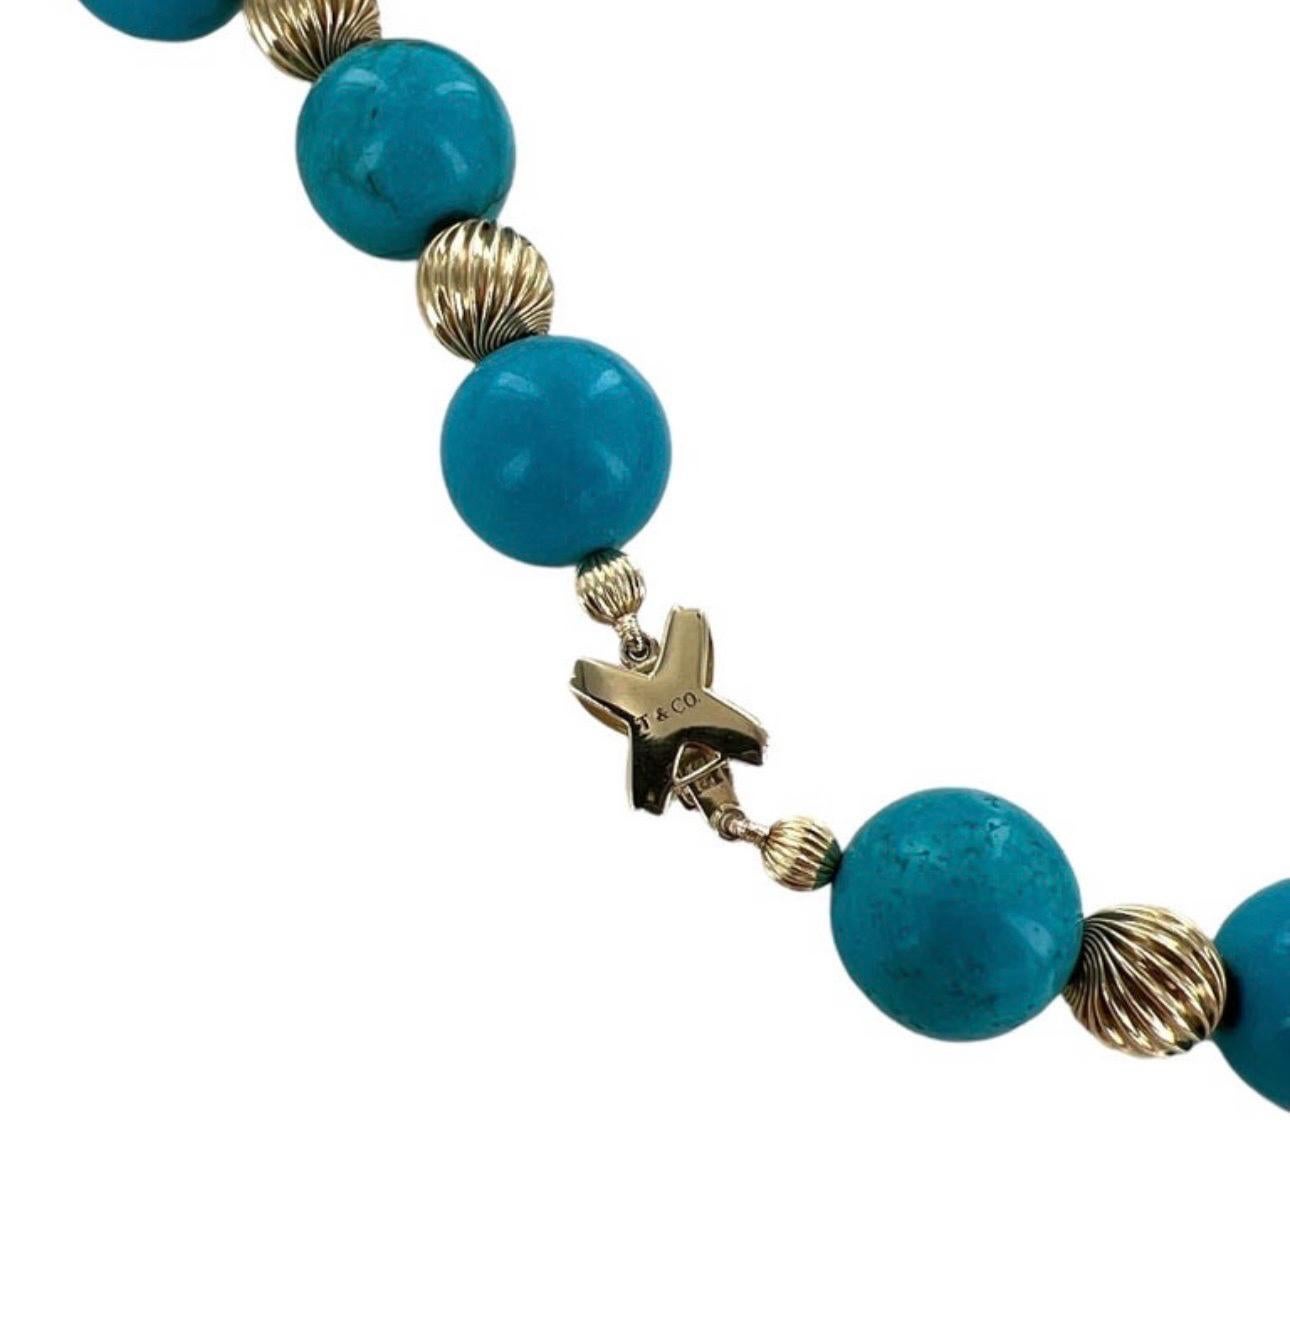 tiffany's turquoise necklace